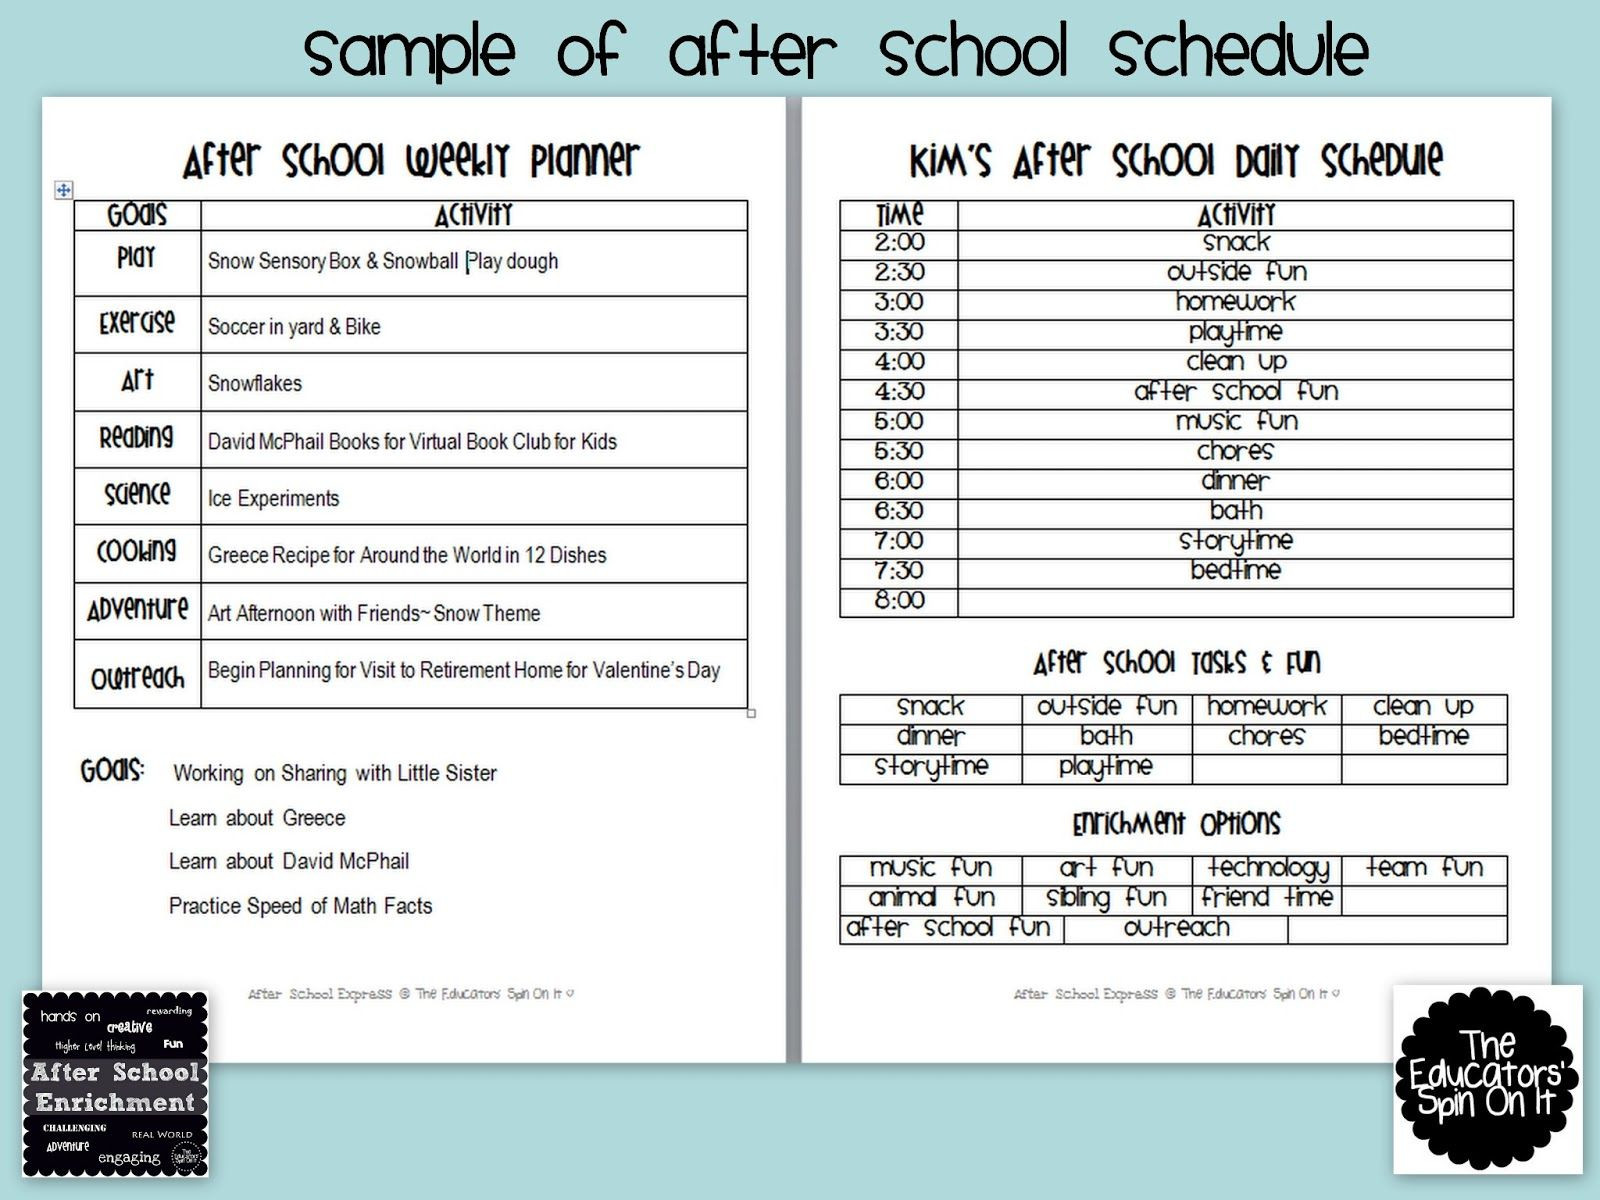 After School Program Lesson Plans after School Weekly Planner